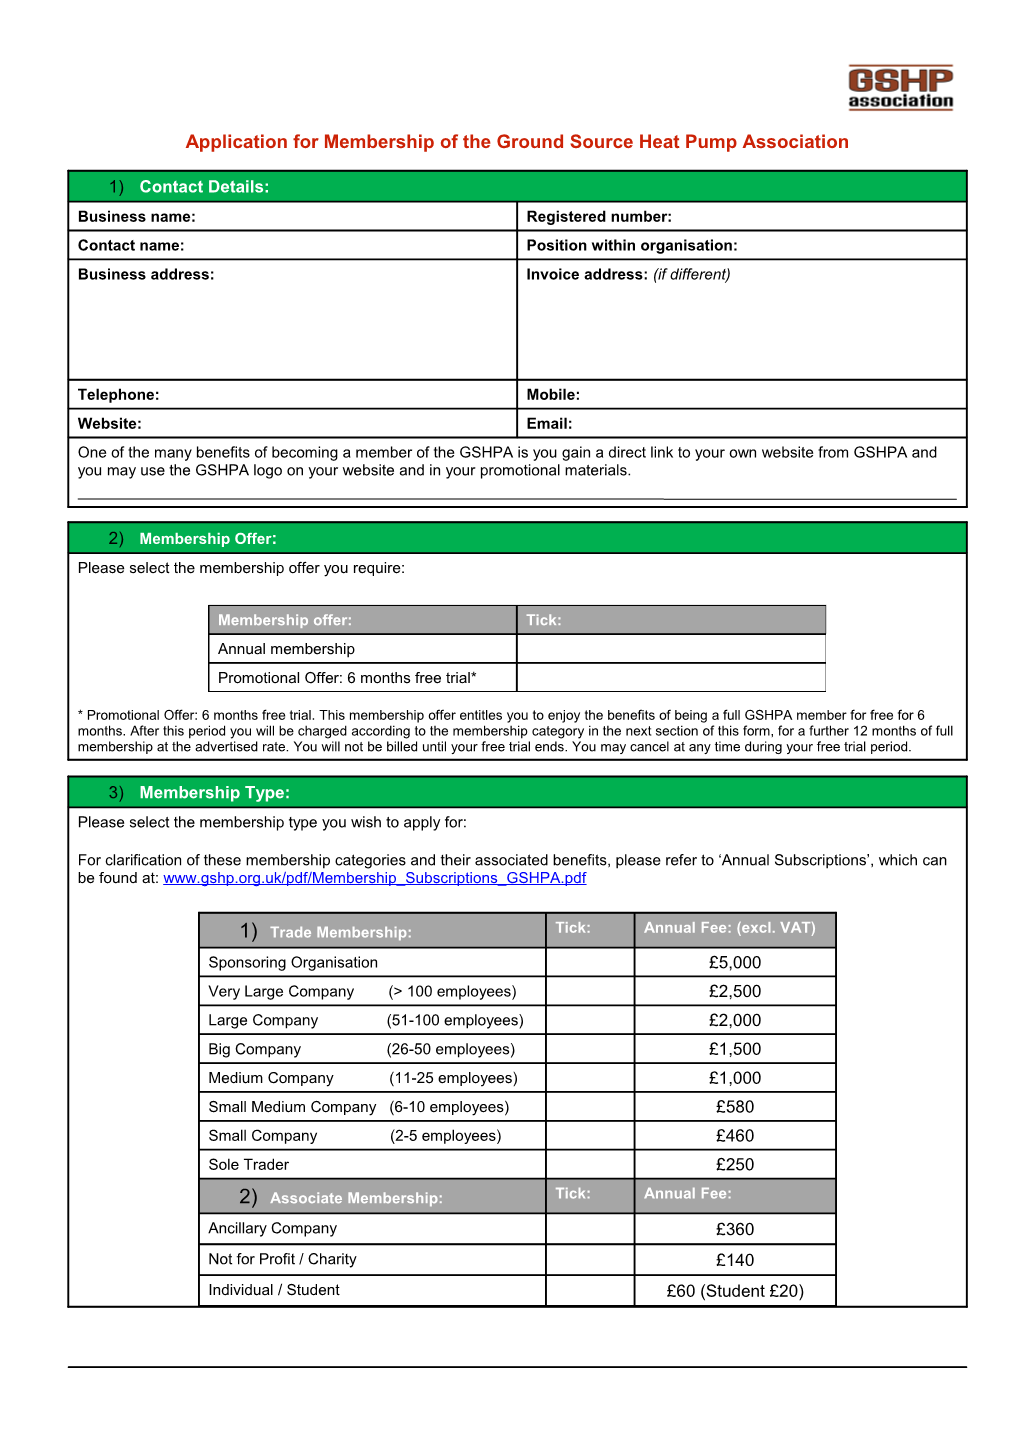 Application Form for Membership of the Ground Source Heat Pump Association